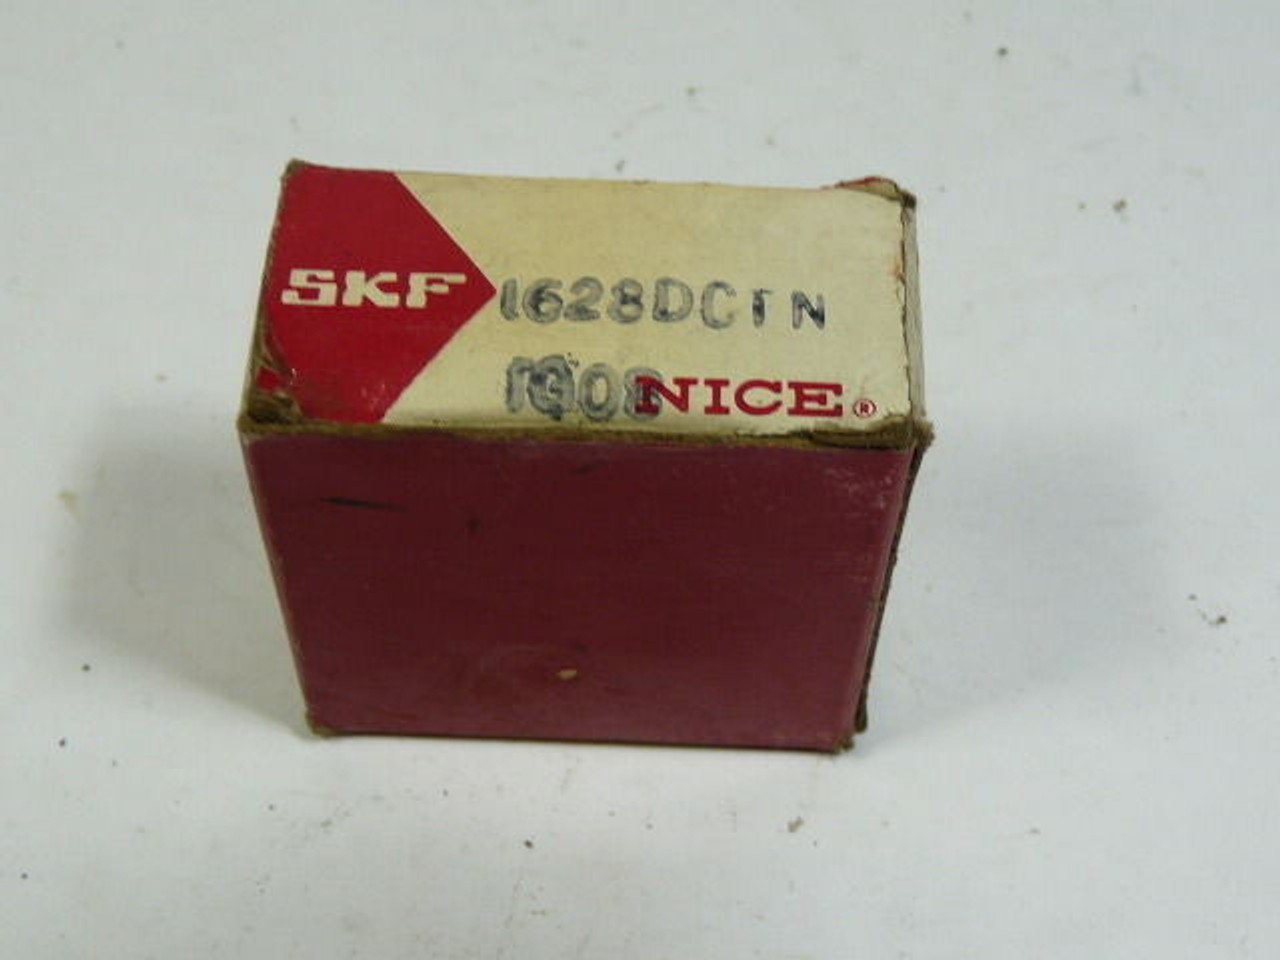 SKF 1628-DCTN Nice Bearing 1-1/4x2-1/2x5/8in Double Seal ! NEW !